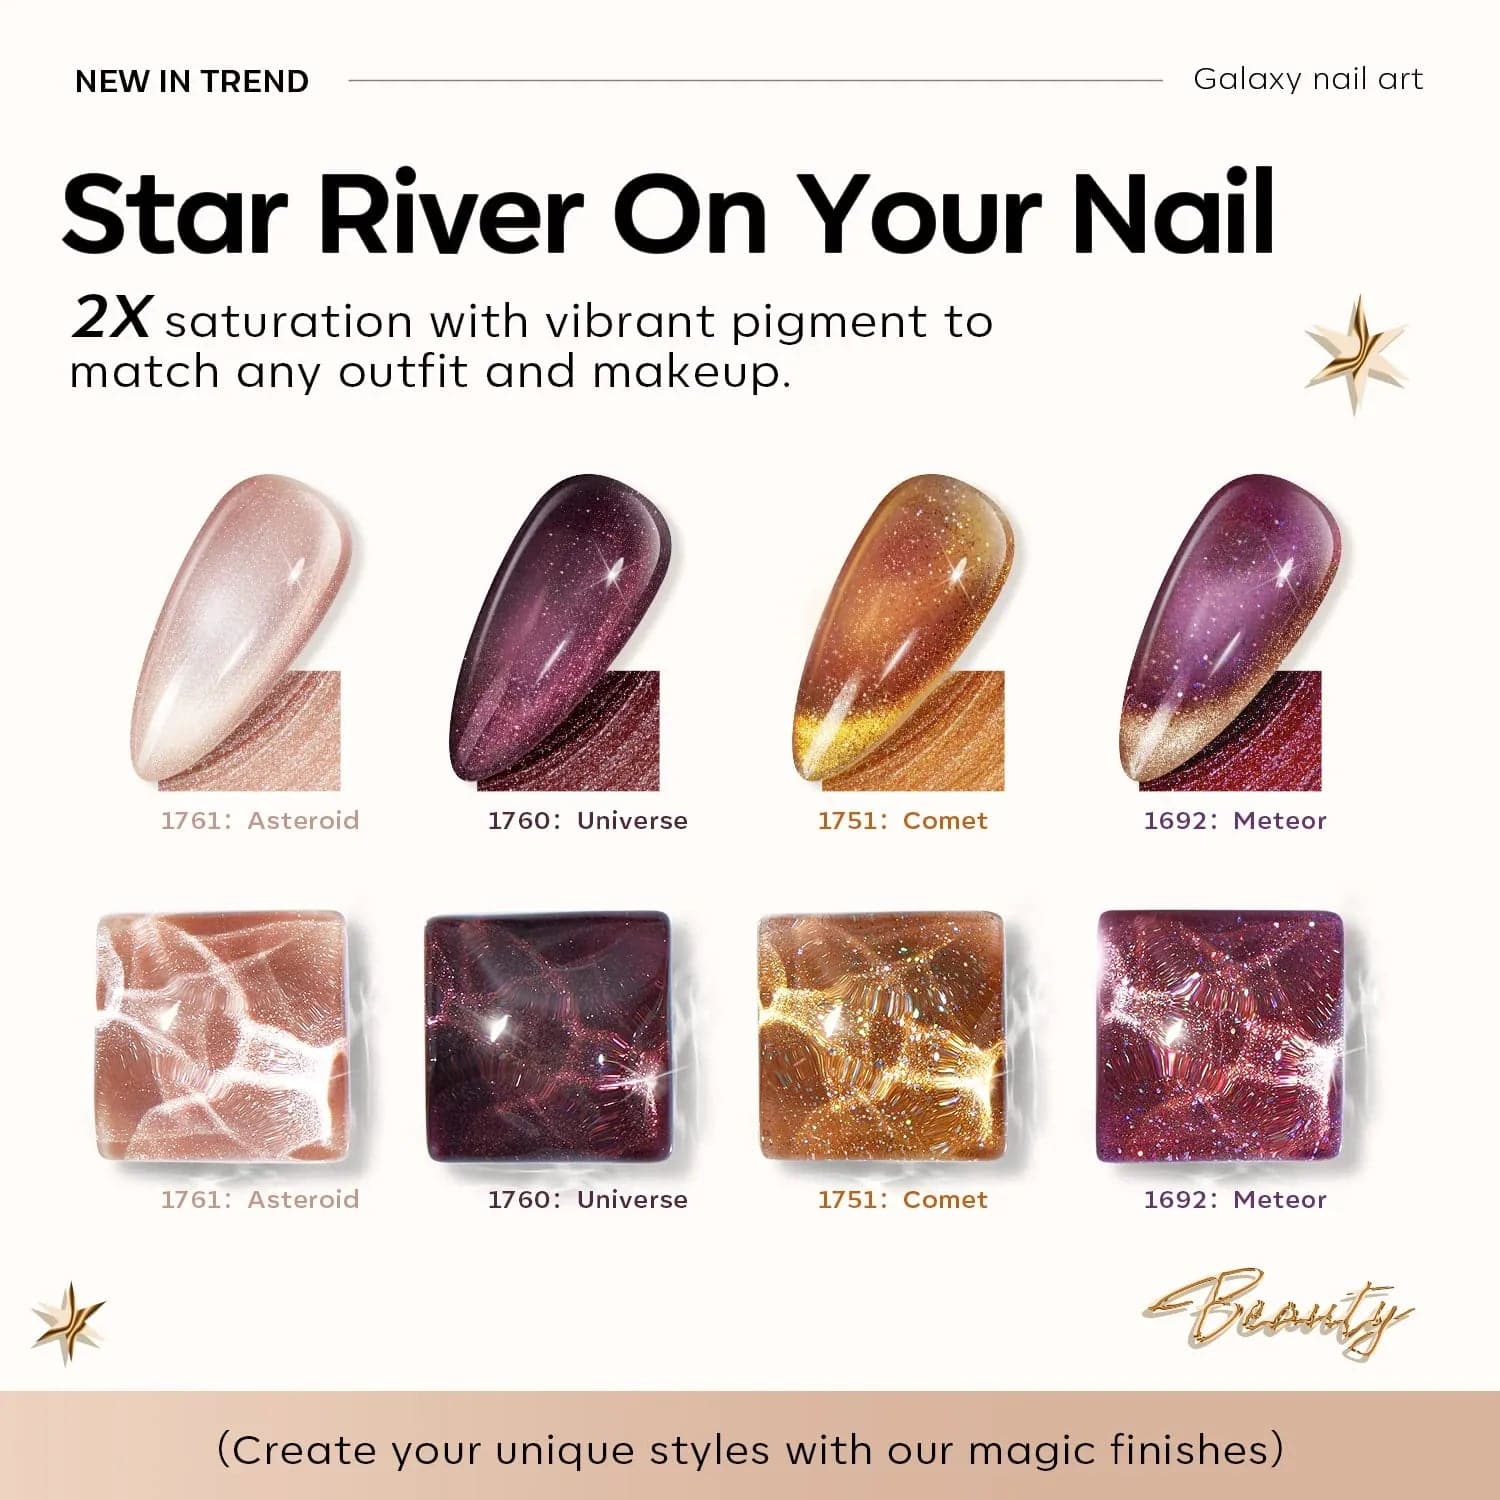 Glitter Waves - 6 Colors Cosmo Party Gel Nail Polish Set【US ONLY】